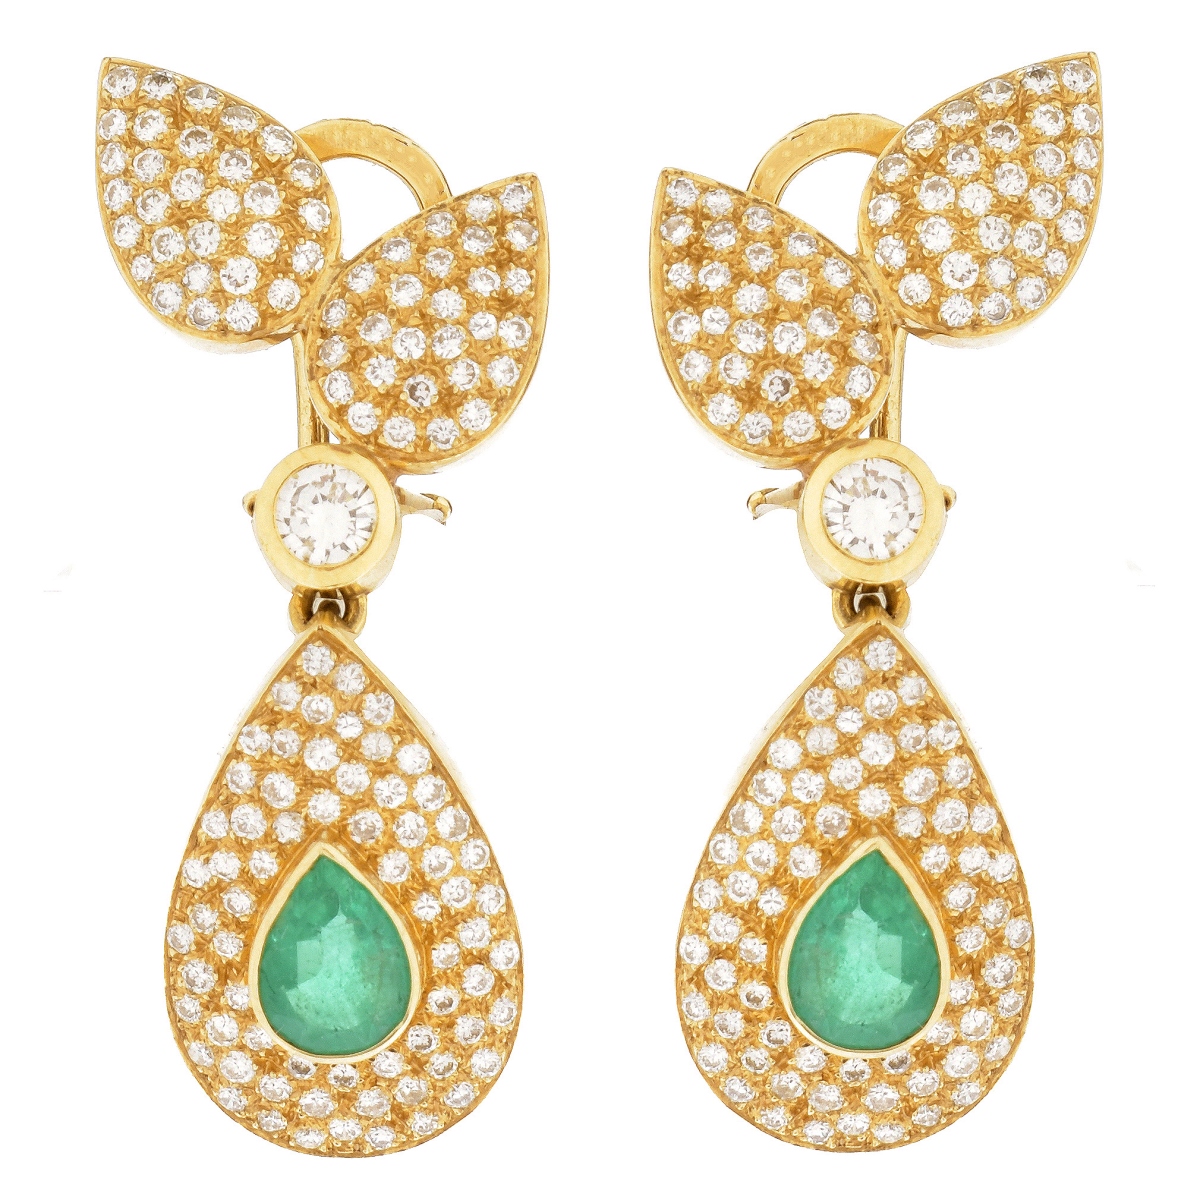 Emerald, Diamond and 18K Earrings | Kodner Auctions